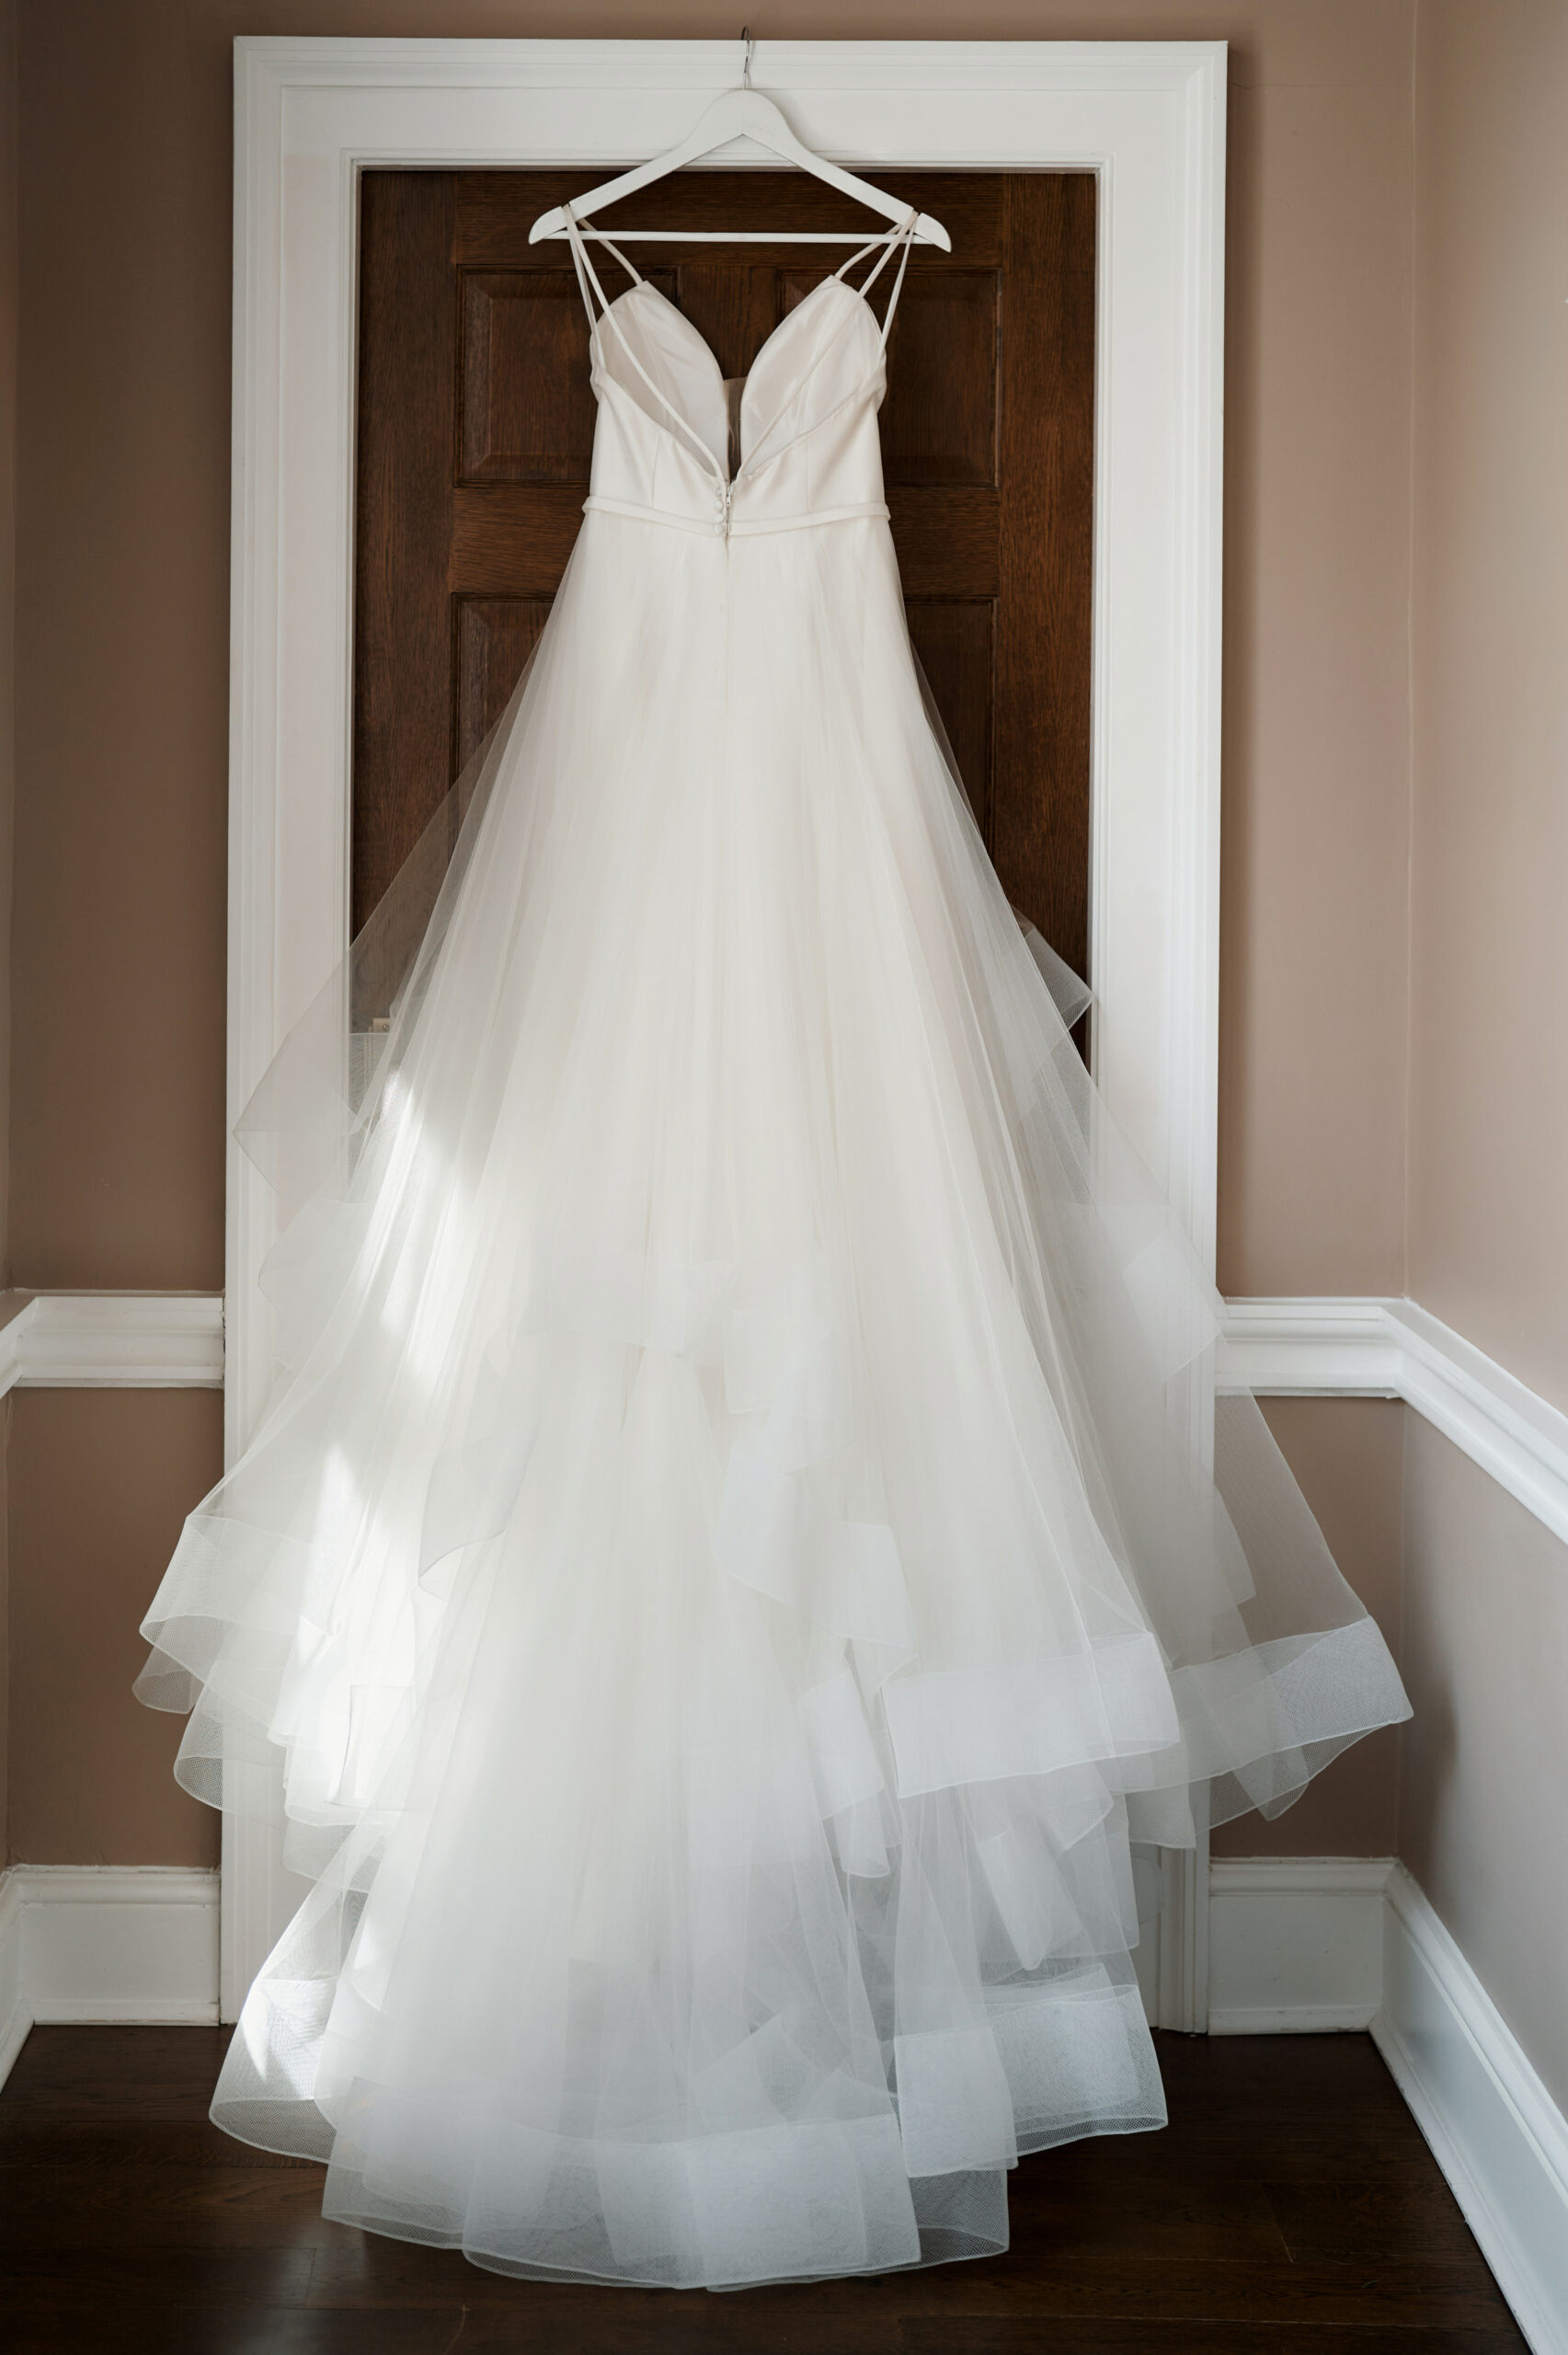 A wedding gown is hanging on a door inside a room.